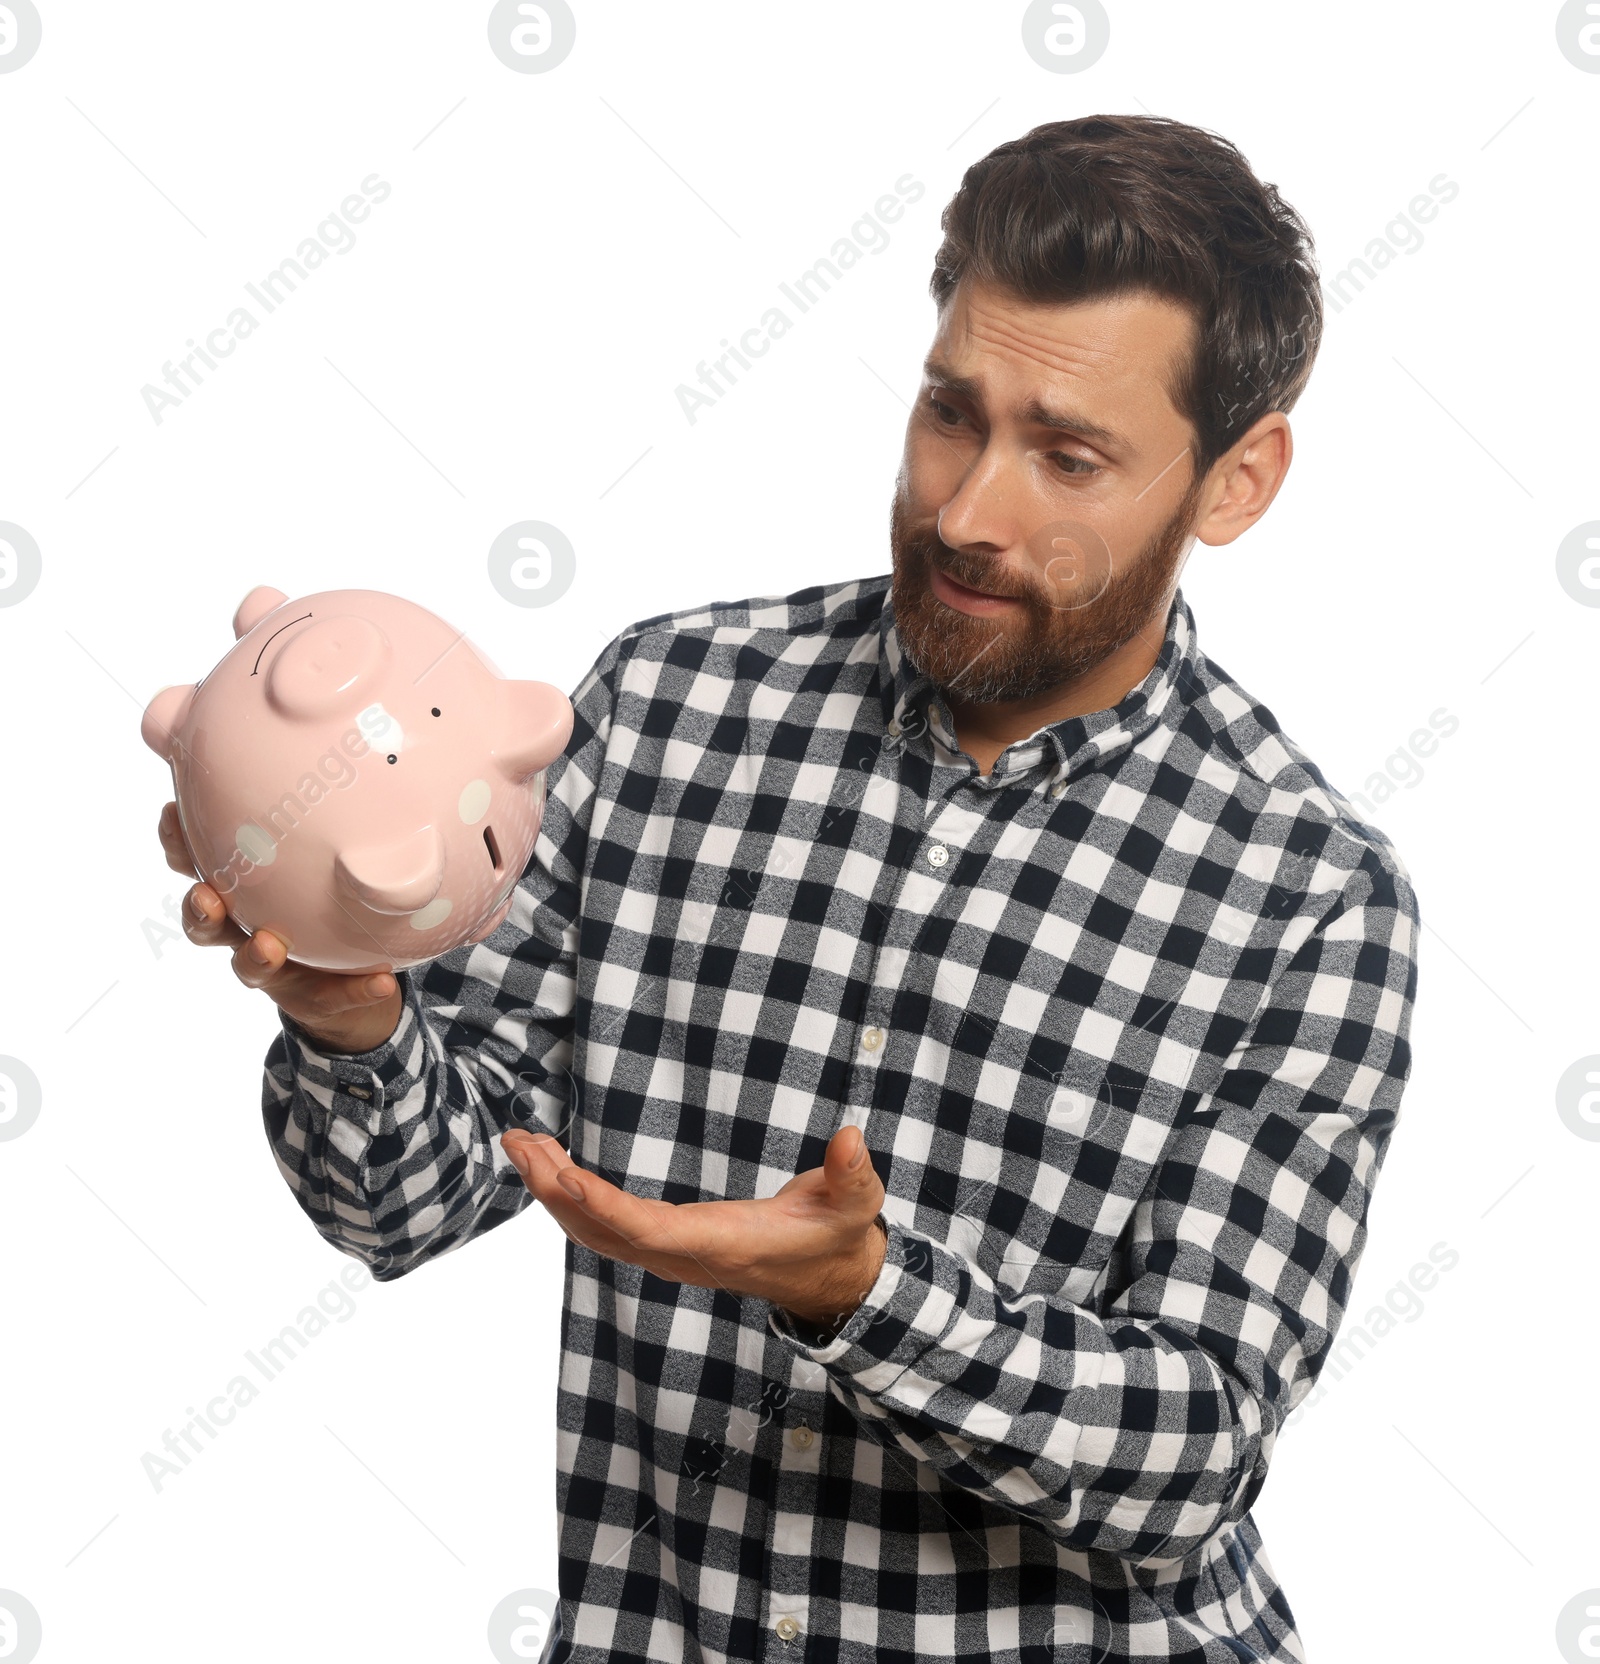 Photo of Man with ceramic piggy bank on white background